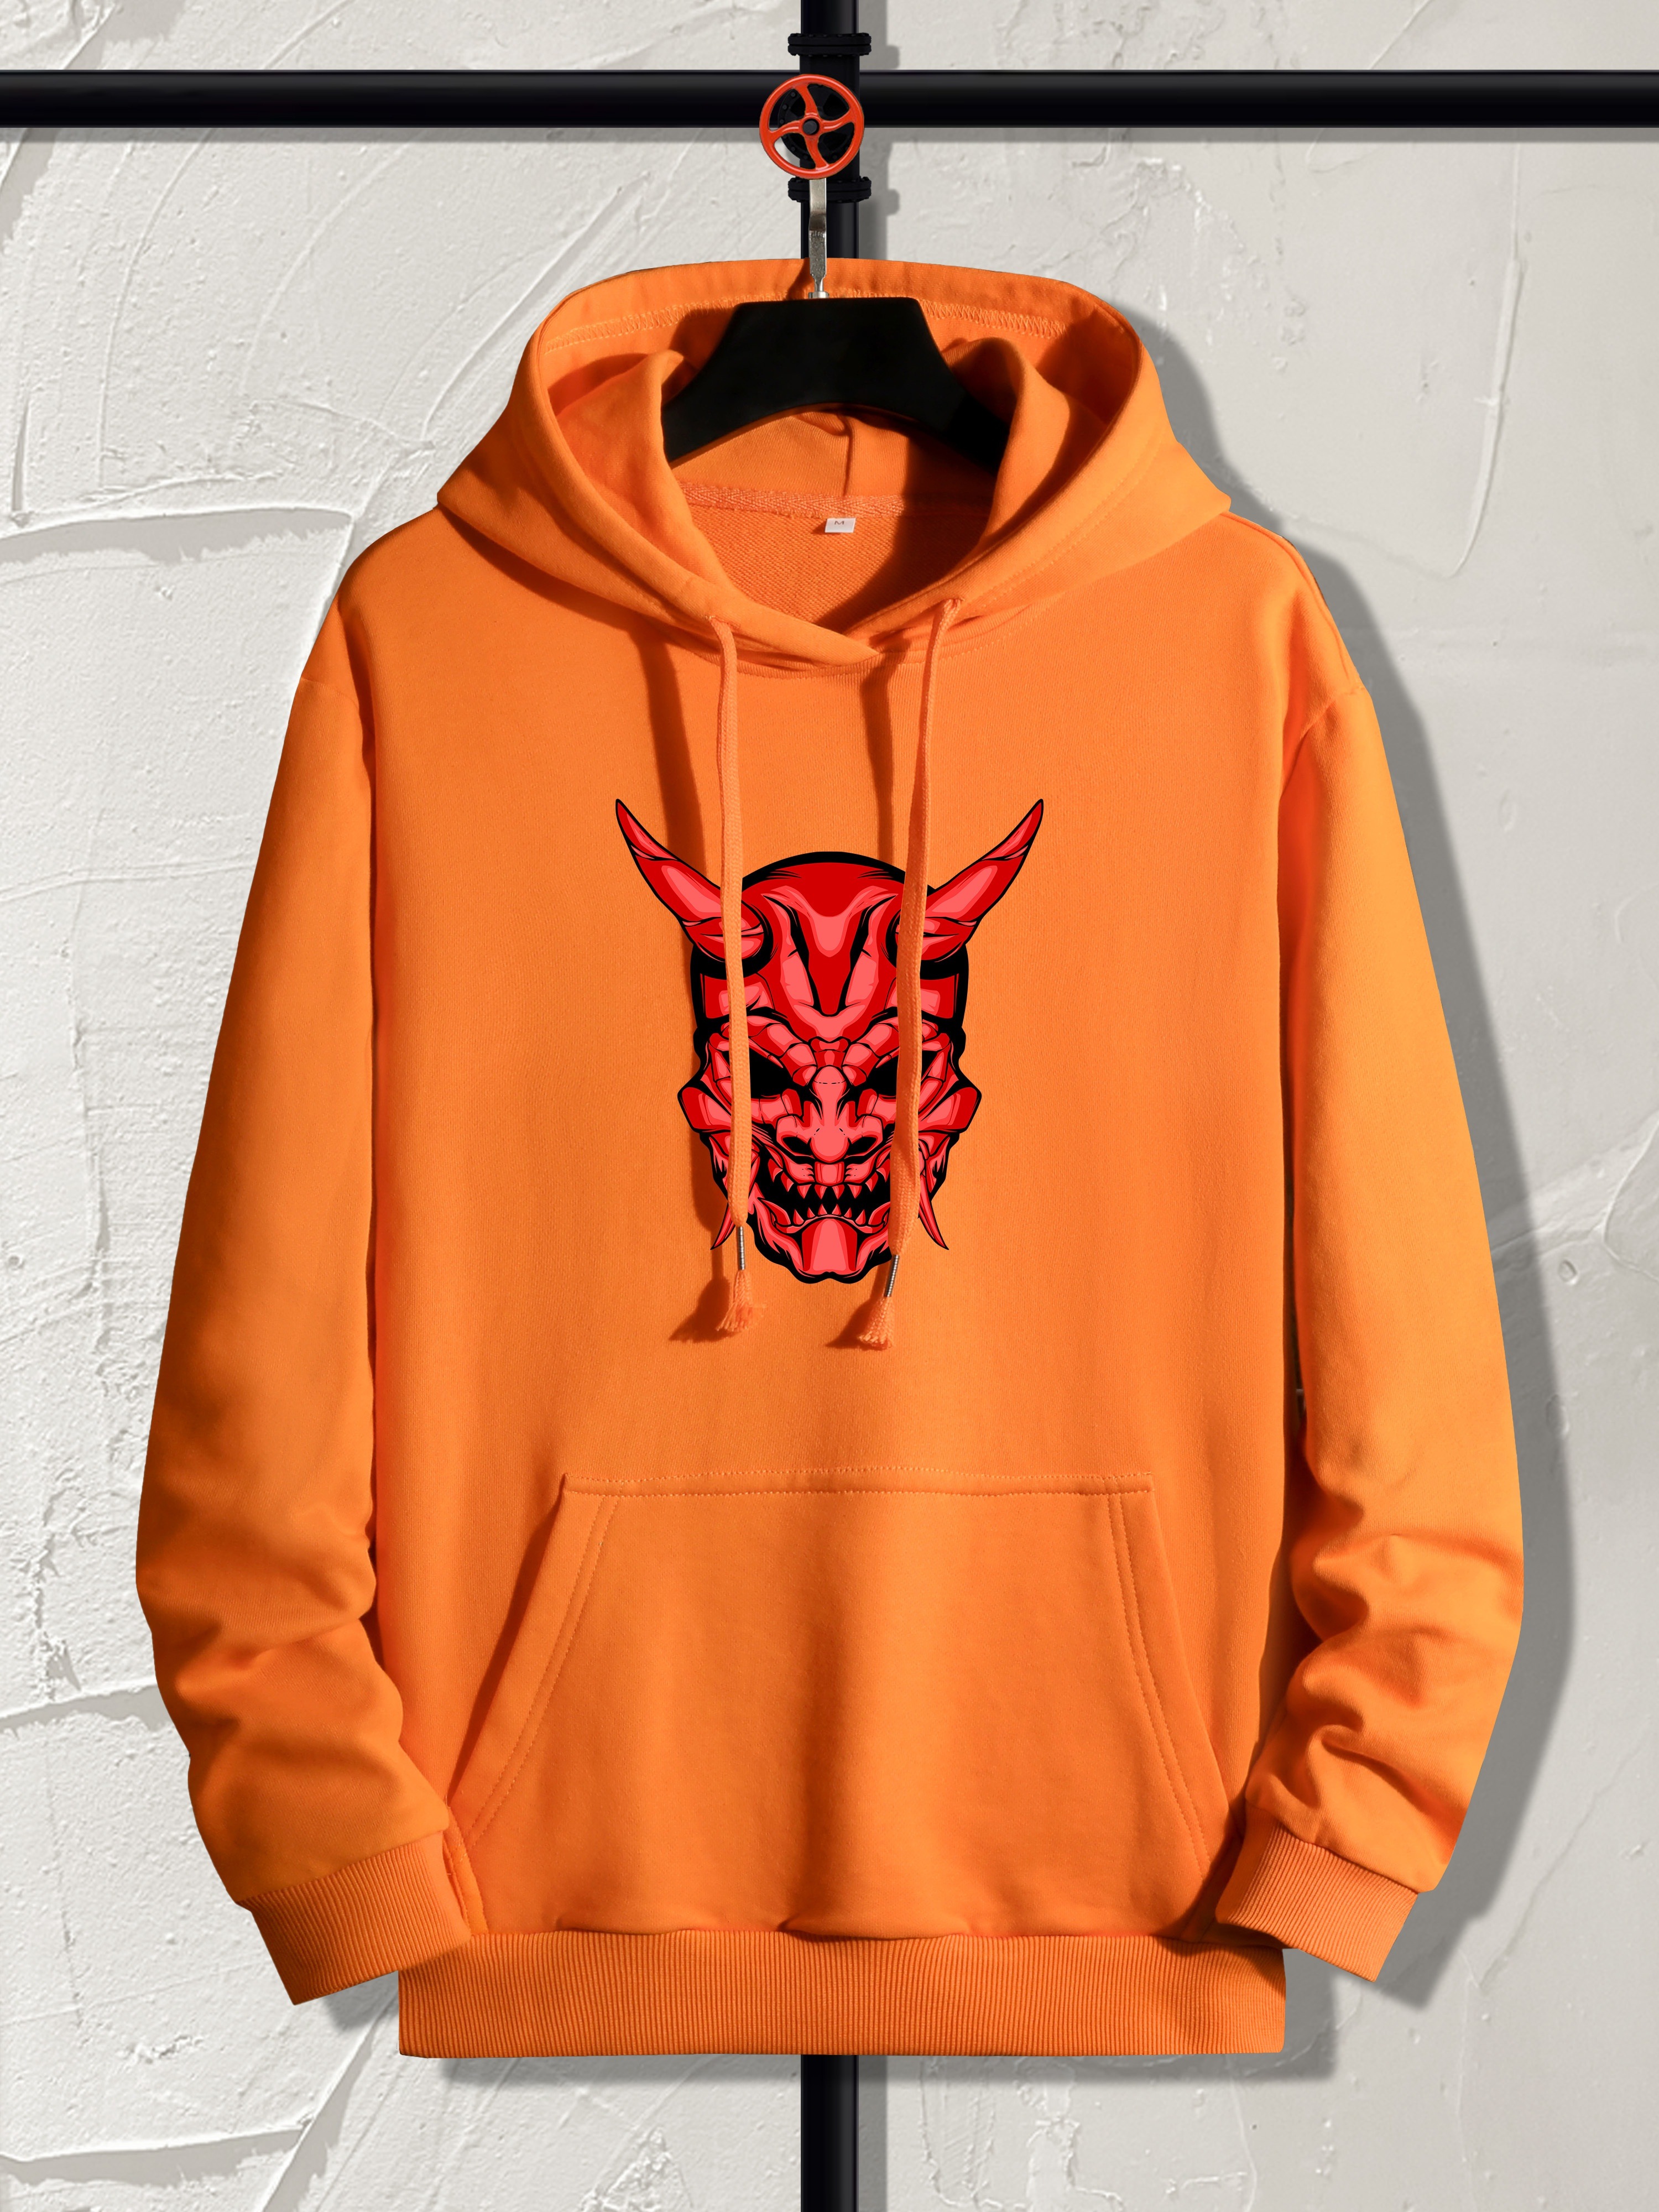 Red-faced Devil Print, Hoodies For Men, Graphic Sweatshirt With